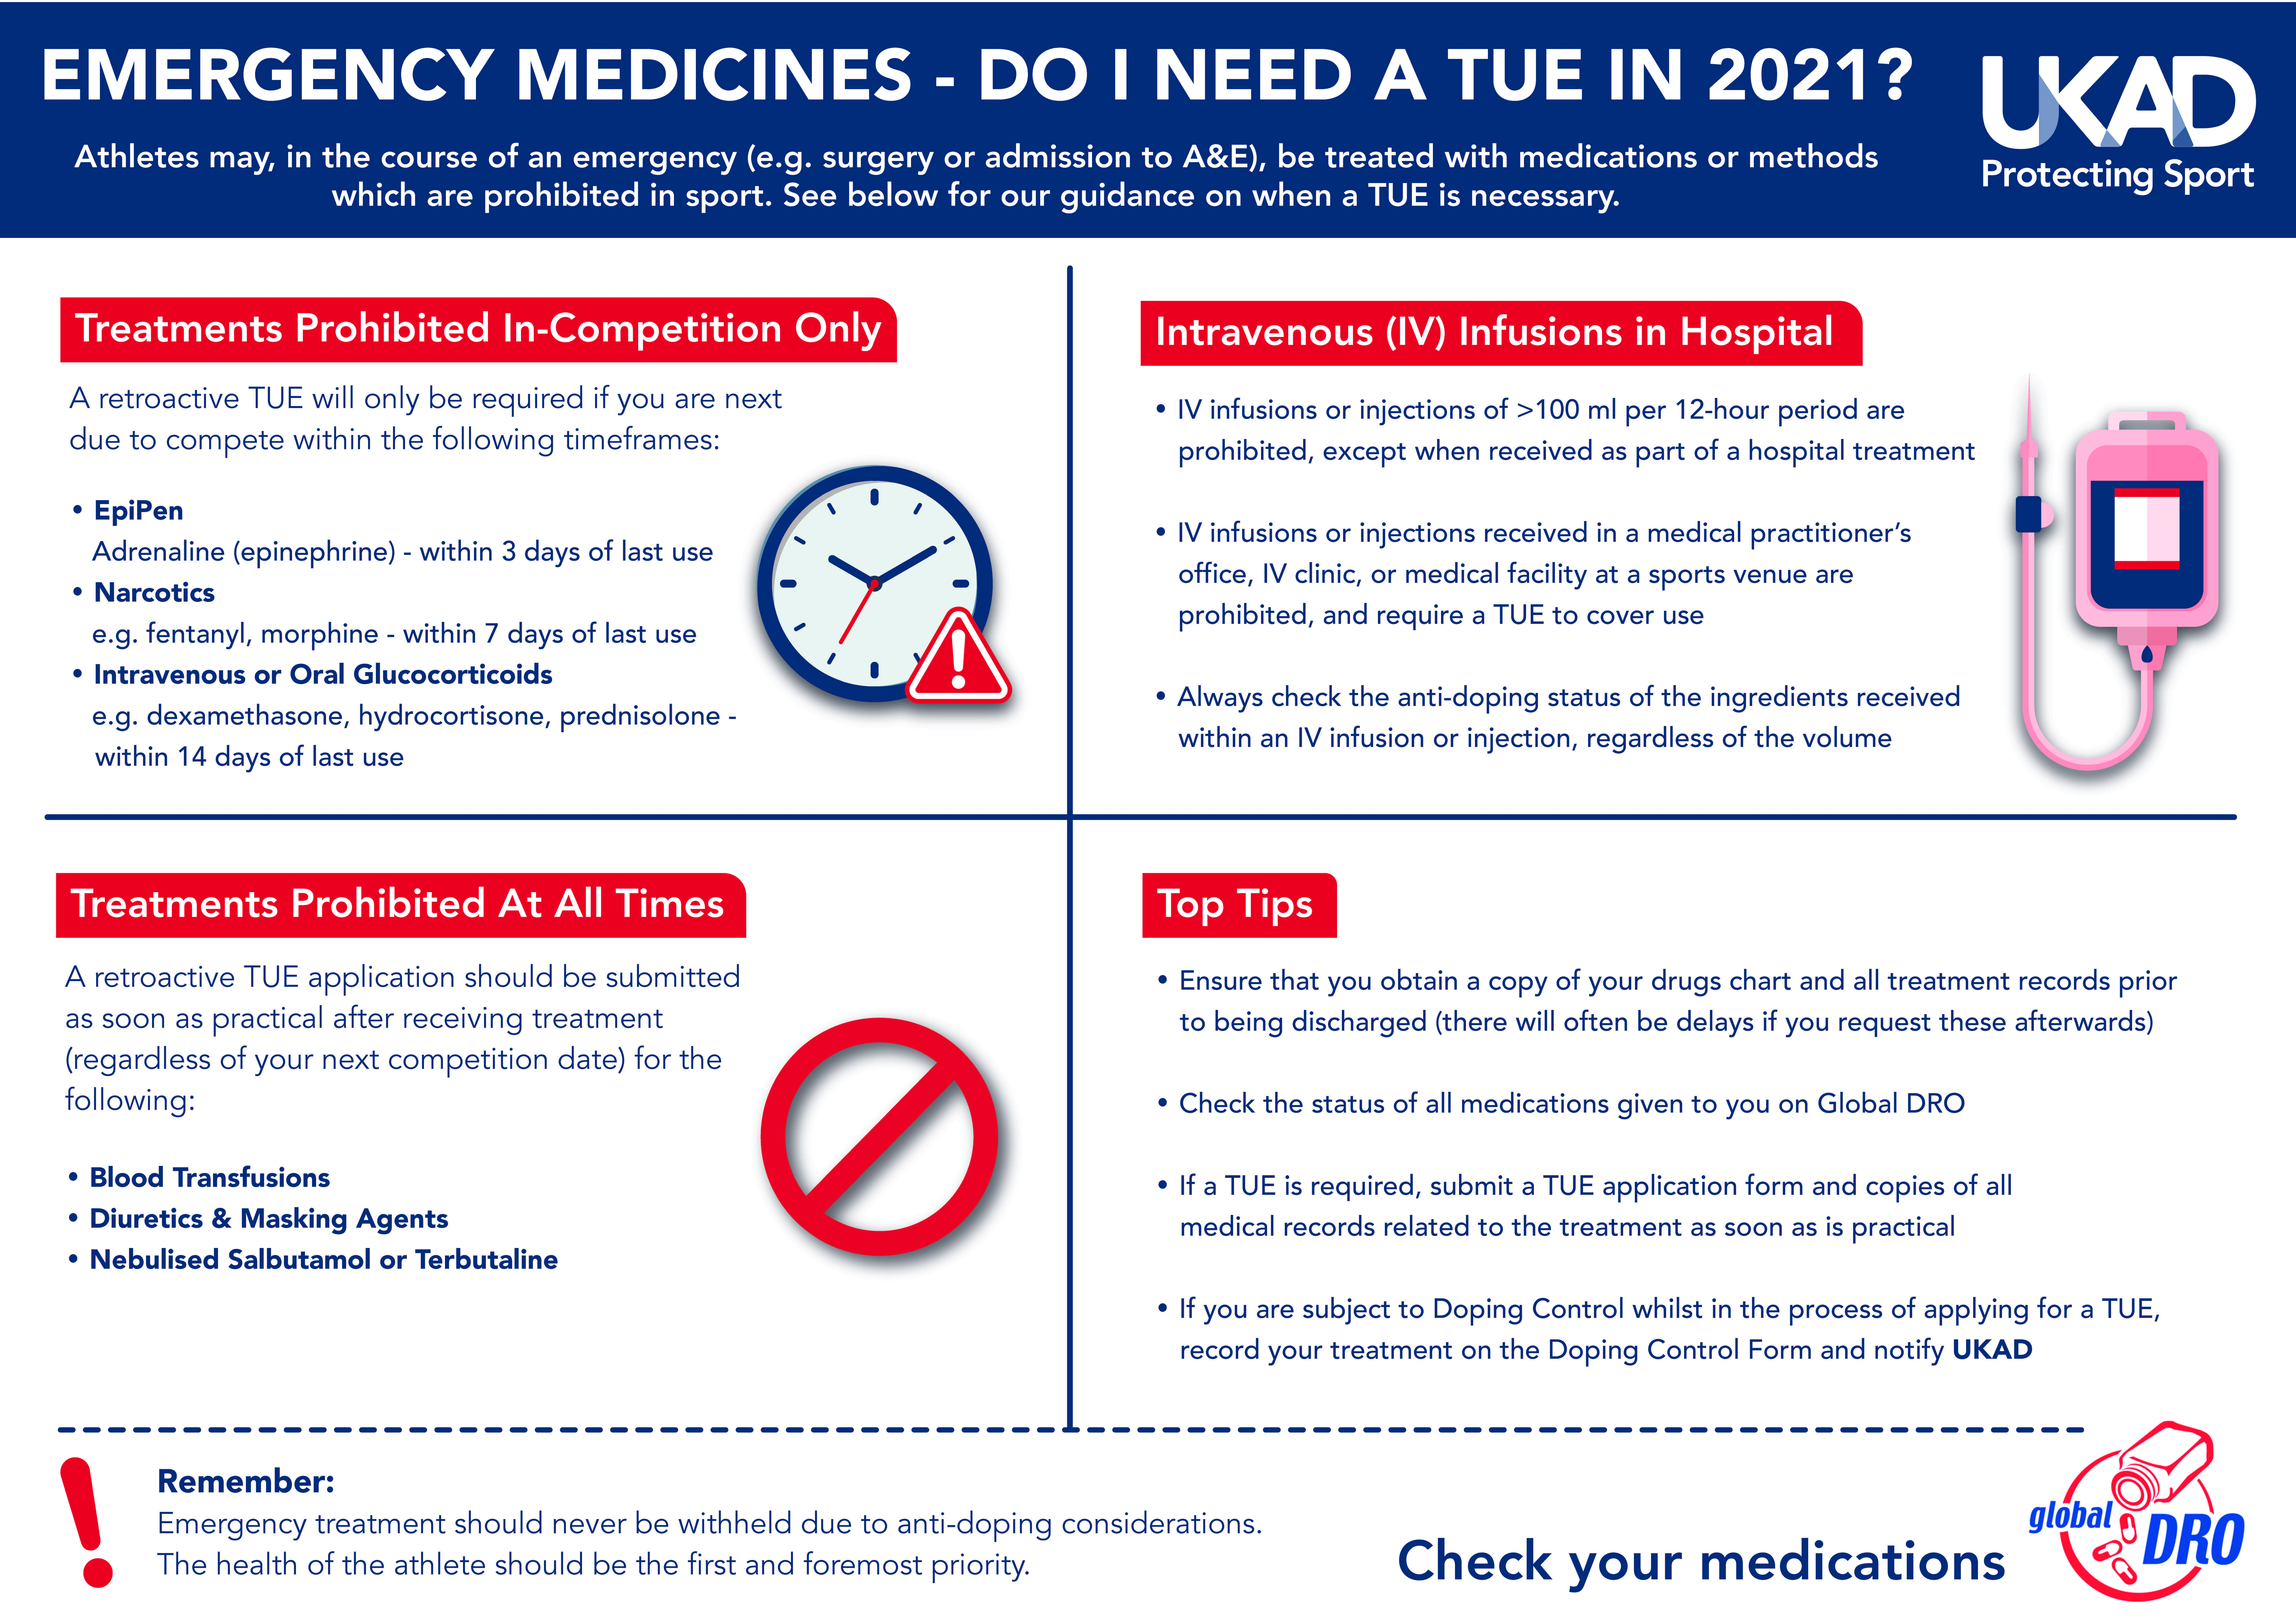 Emergency Medications Infographic